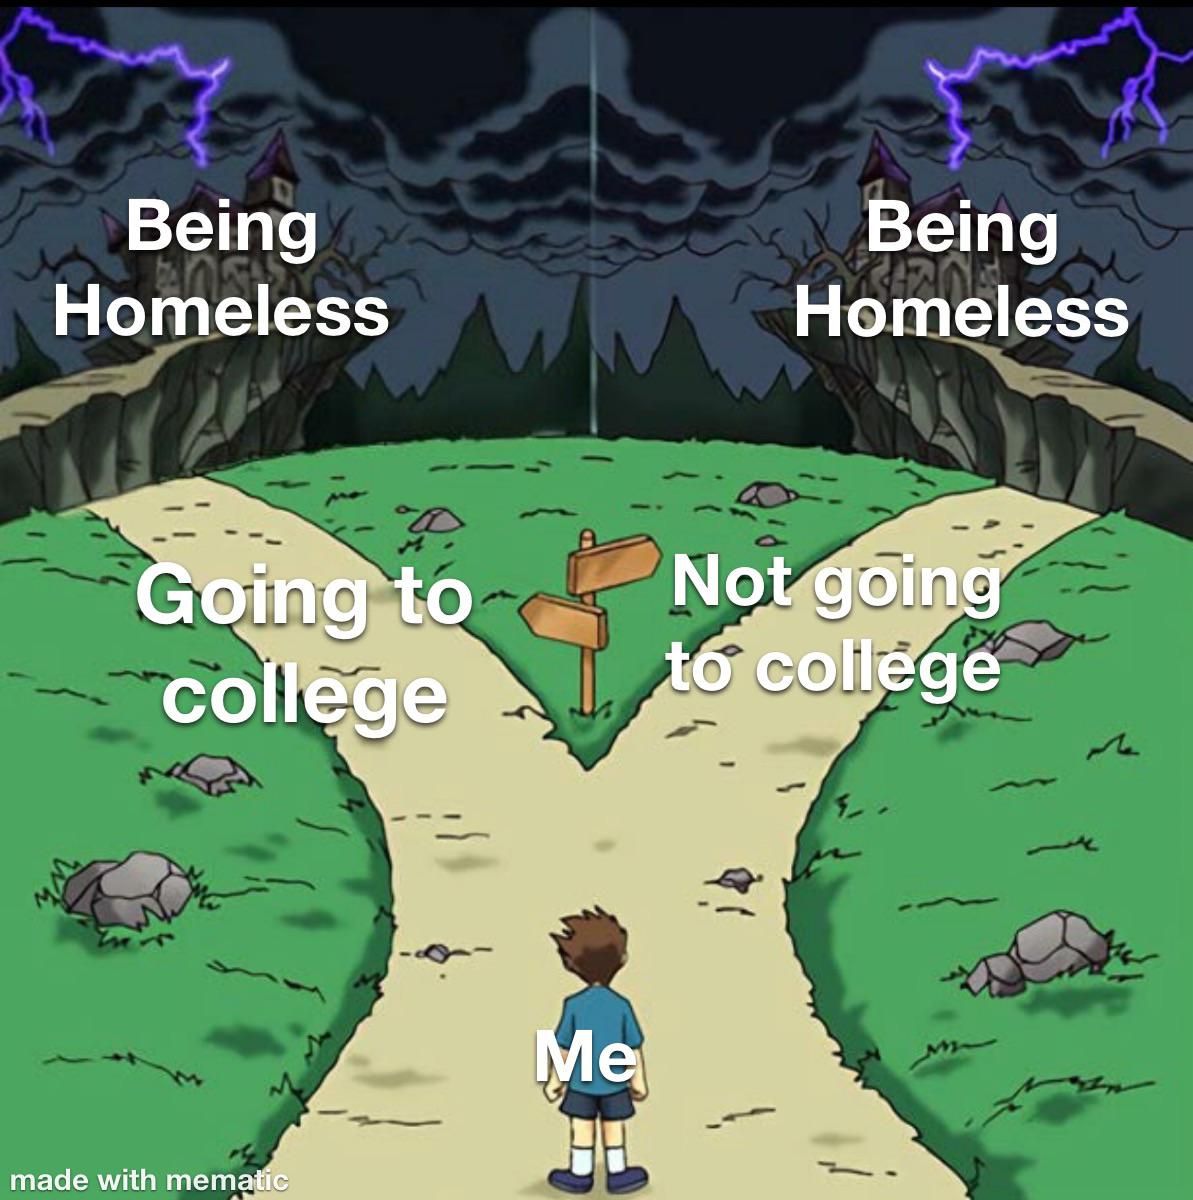 Go to college kids